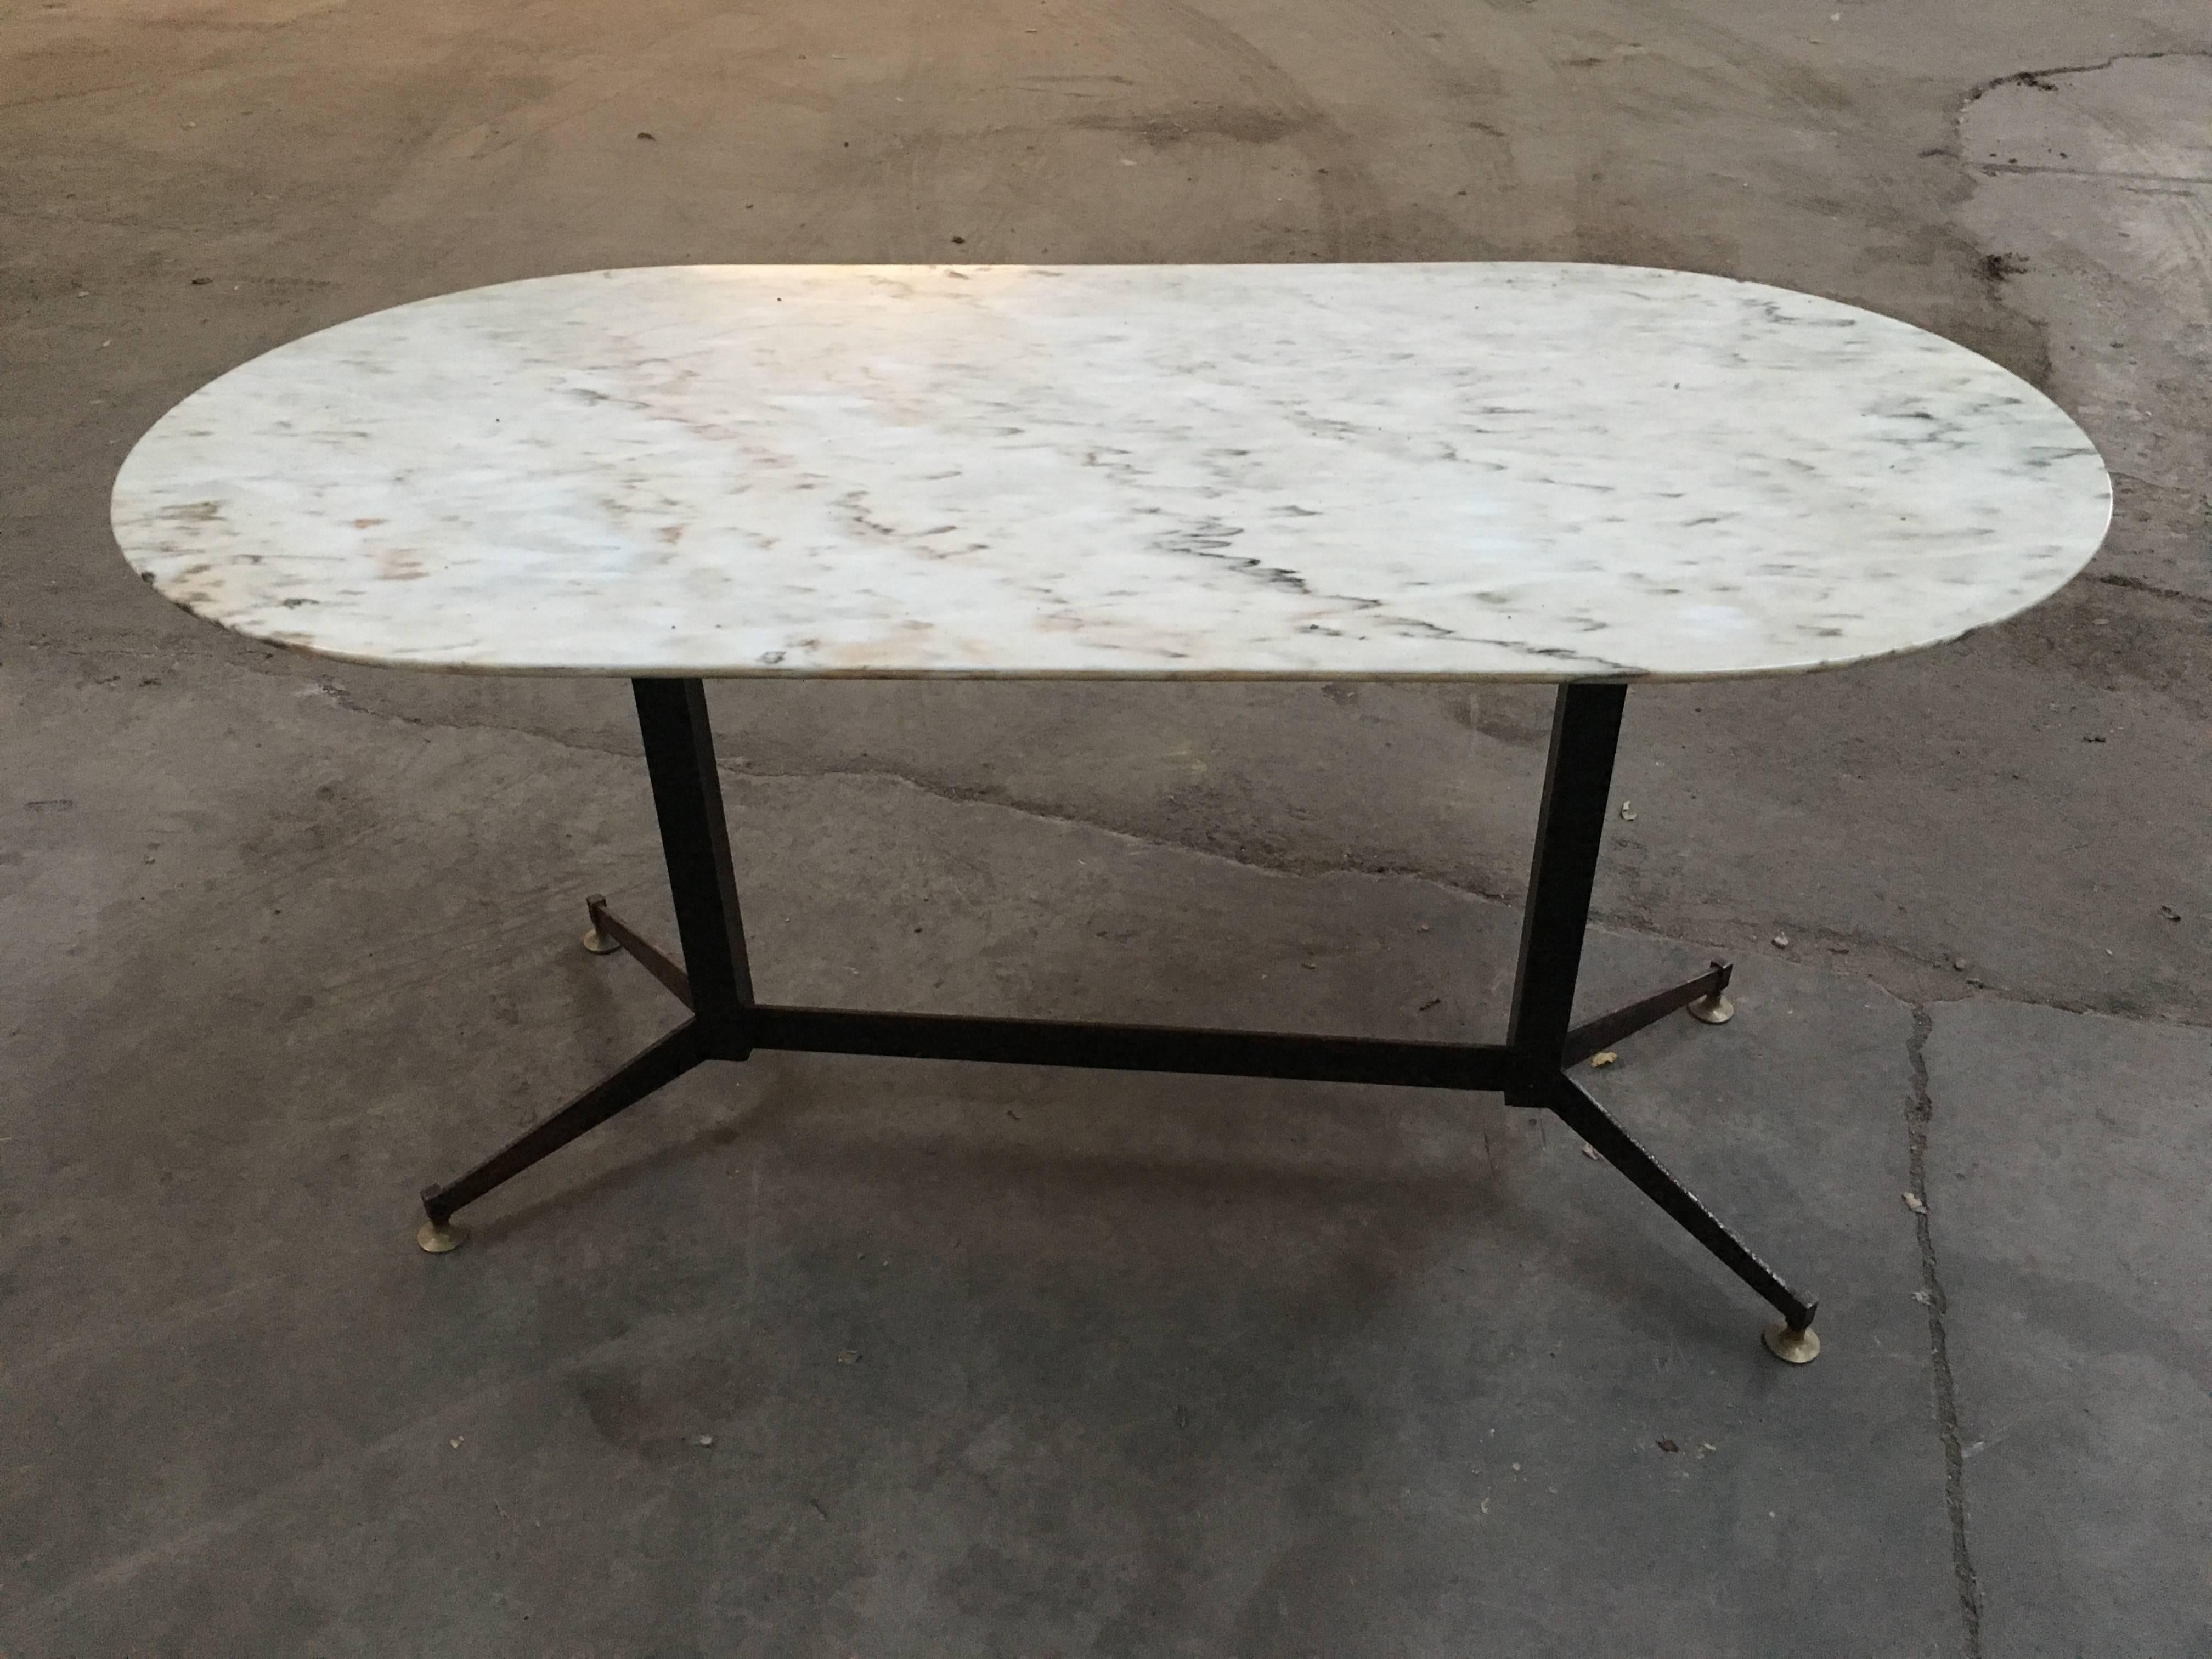 Italian table with iron base, brass feet and oval marble top from 1960s
Measurements: width cm 160, depth cm 80, height cm 80
On demand and under quotation height can be changed.